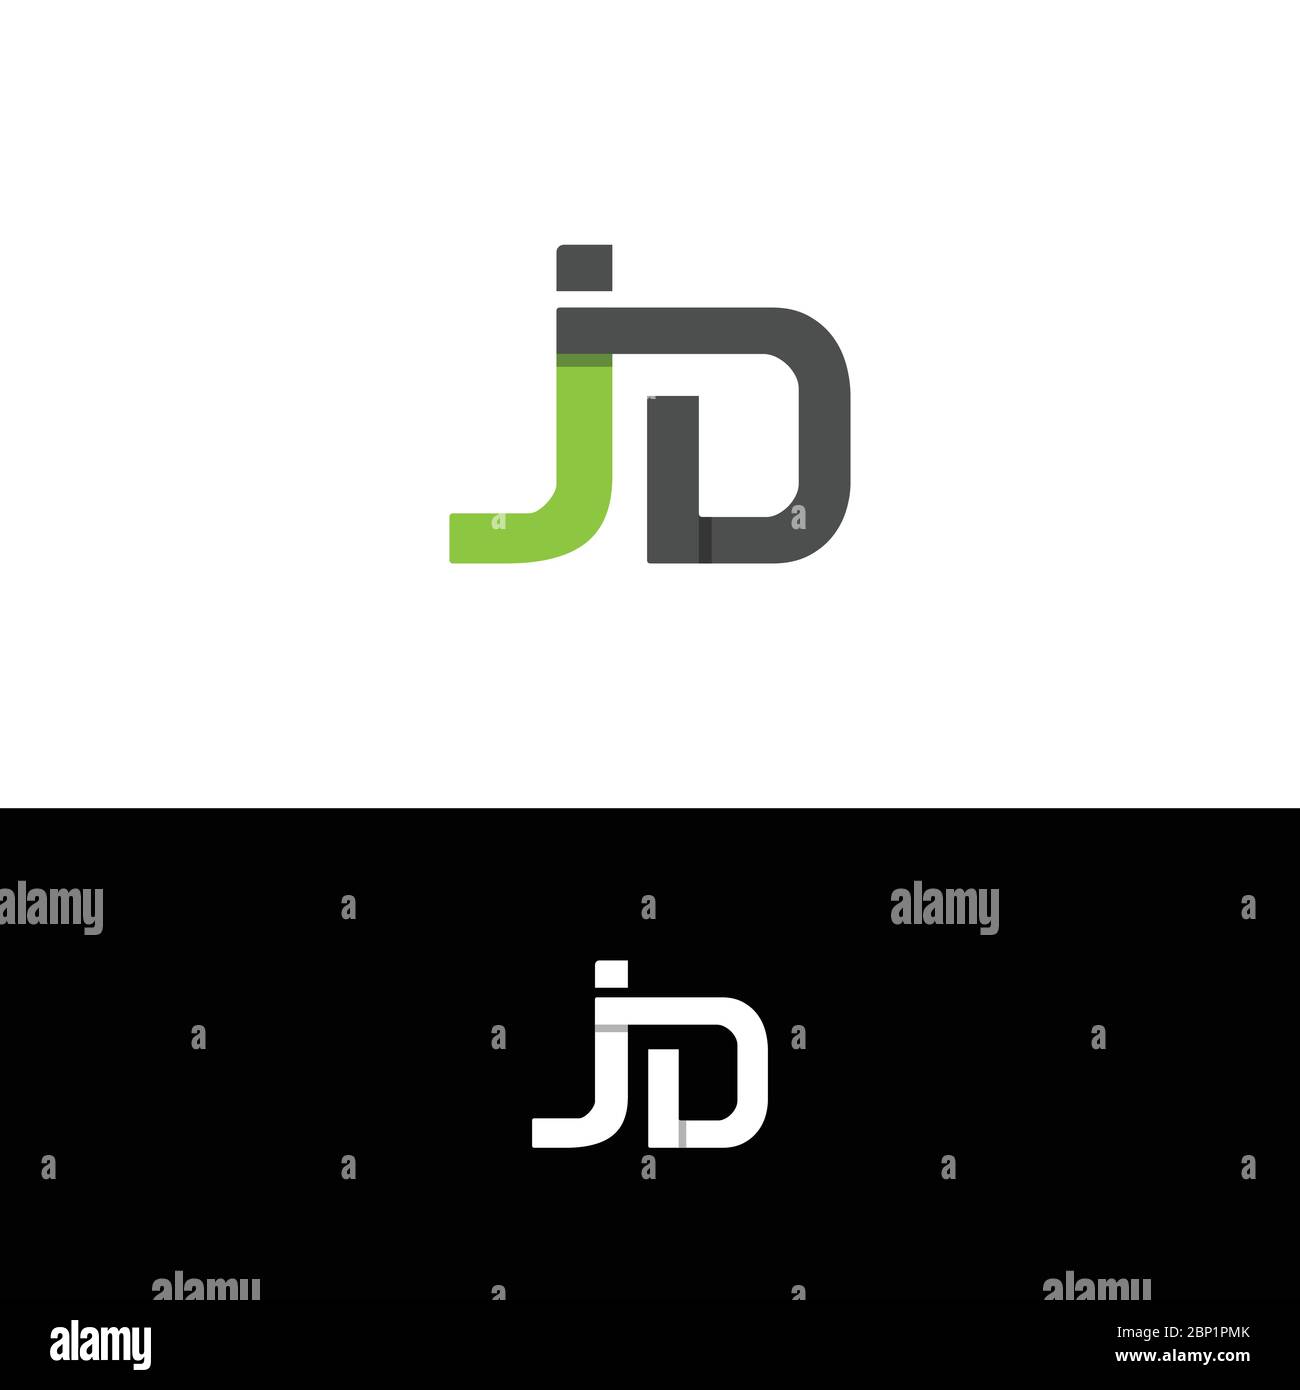 Letter JD typography logo design with shadow isolated on a black and white background Stock Vector